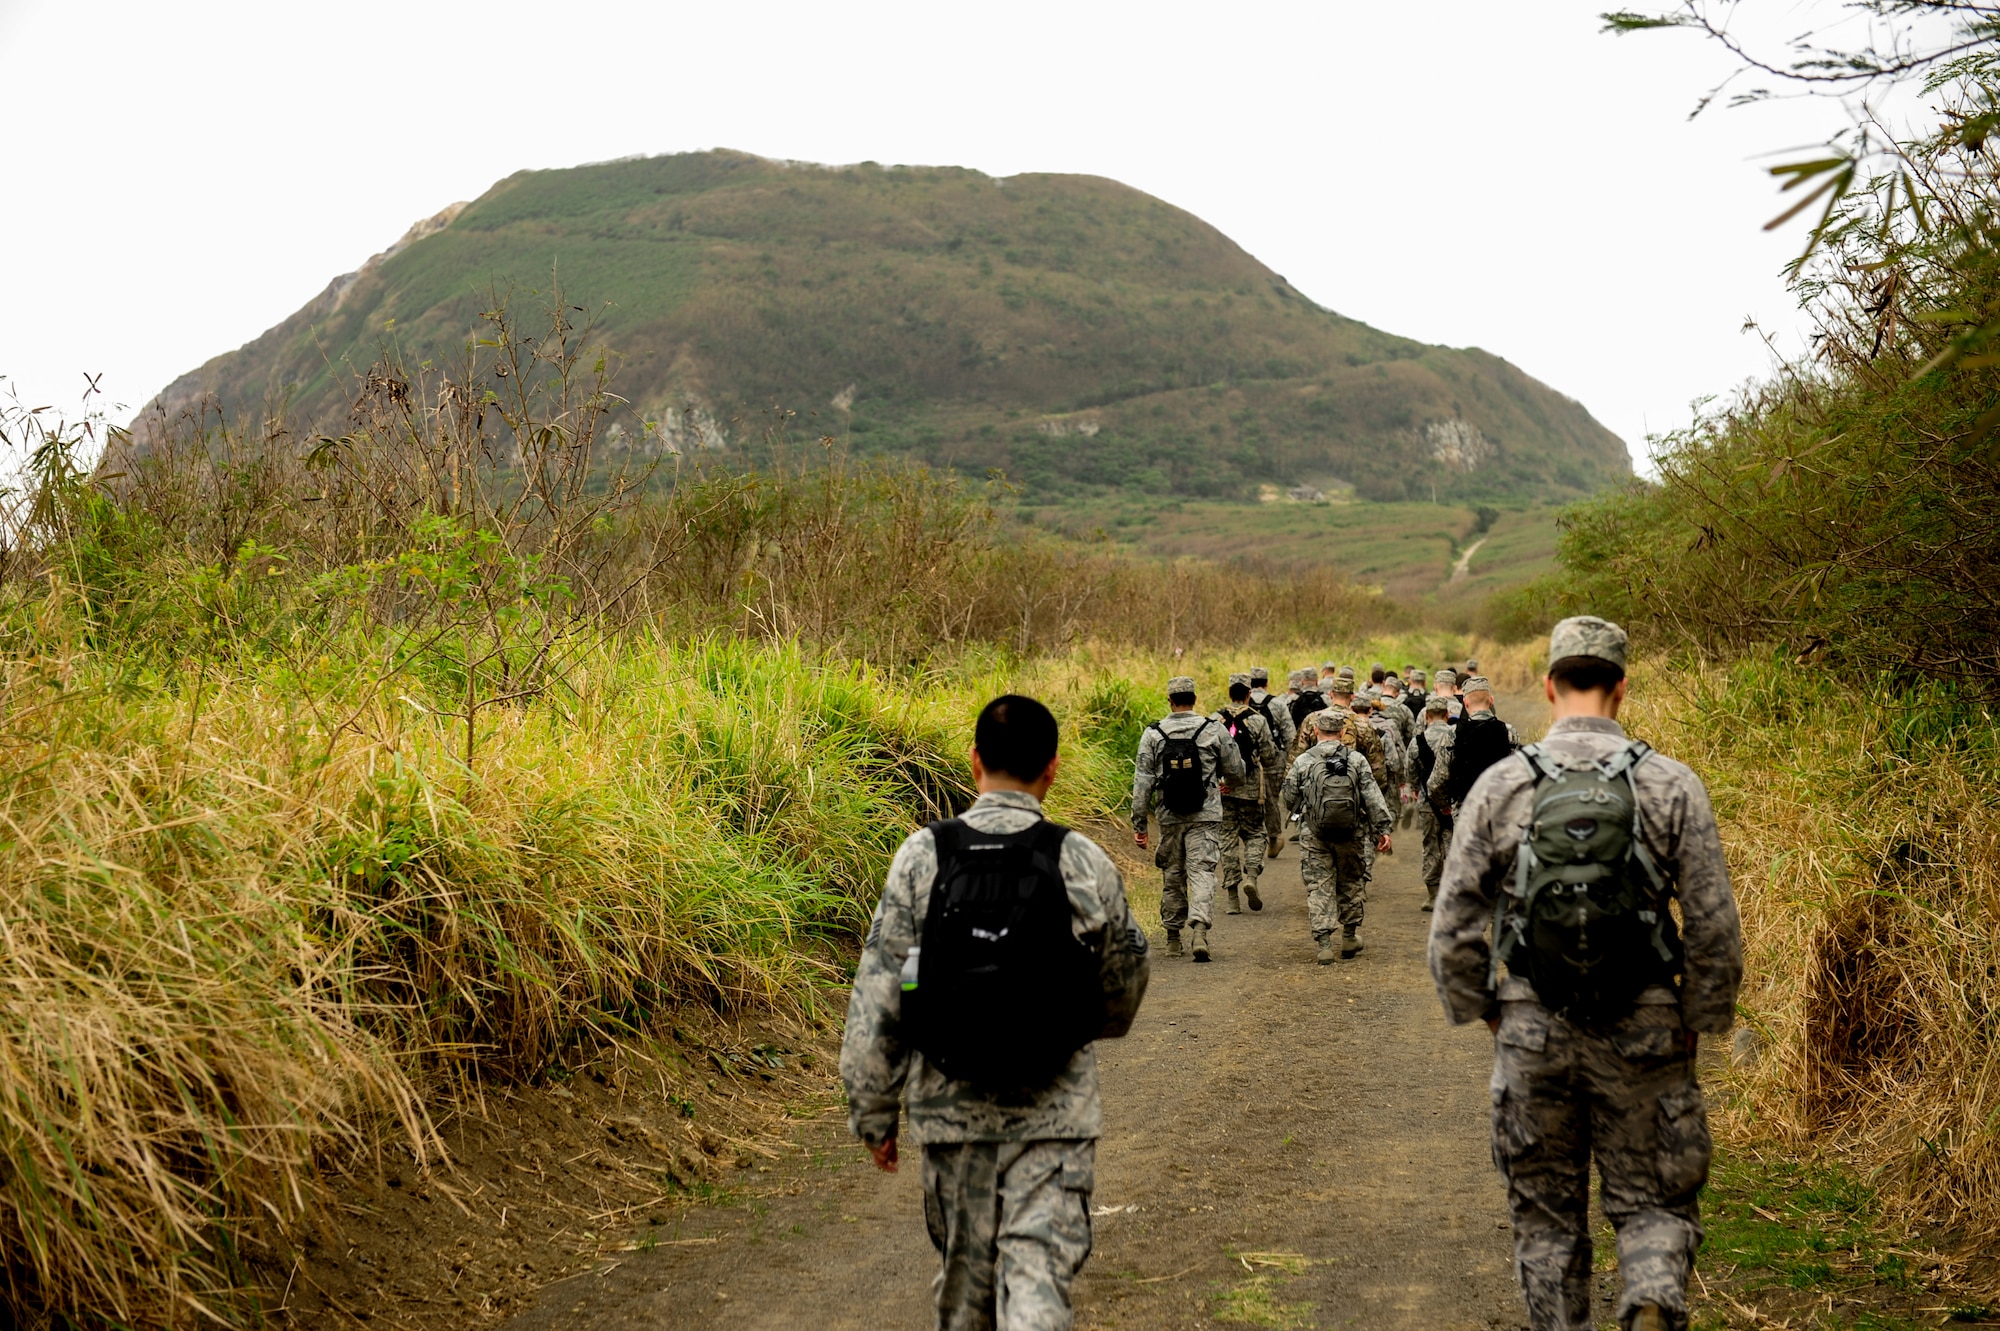 Airmen from Kadena Air Base, Japan, hike toward Mount Suribachi on Iwo To, Japan Jan. 8, 2015. They visited Iwo To as part of a professional military education outing to learn about the battle of Iwo Jima that took place nearly 70 years ago. (U.S. Air Force photo by Airman 1st Class John Linzmeier)